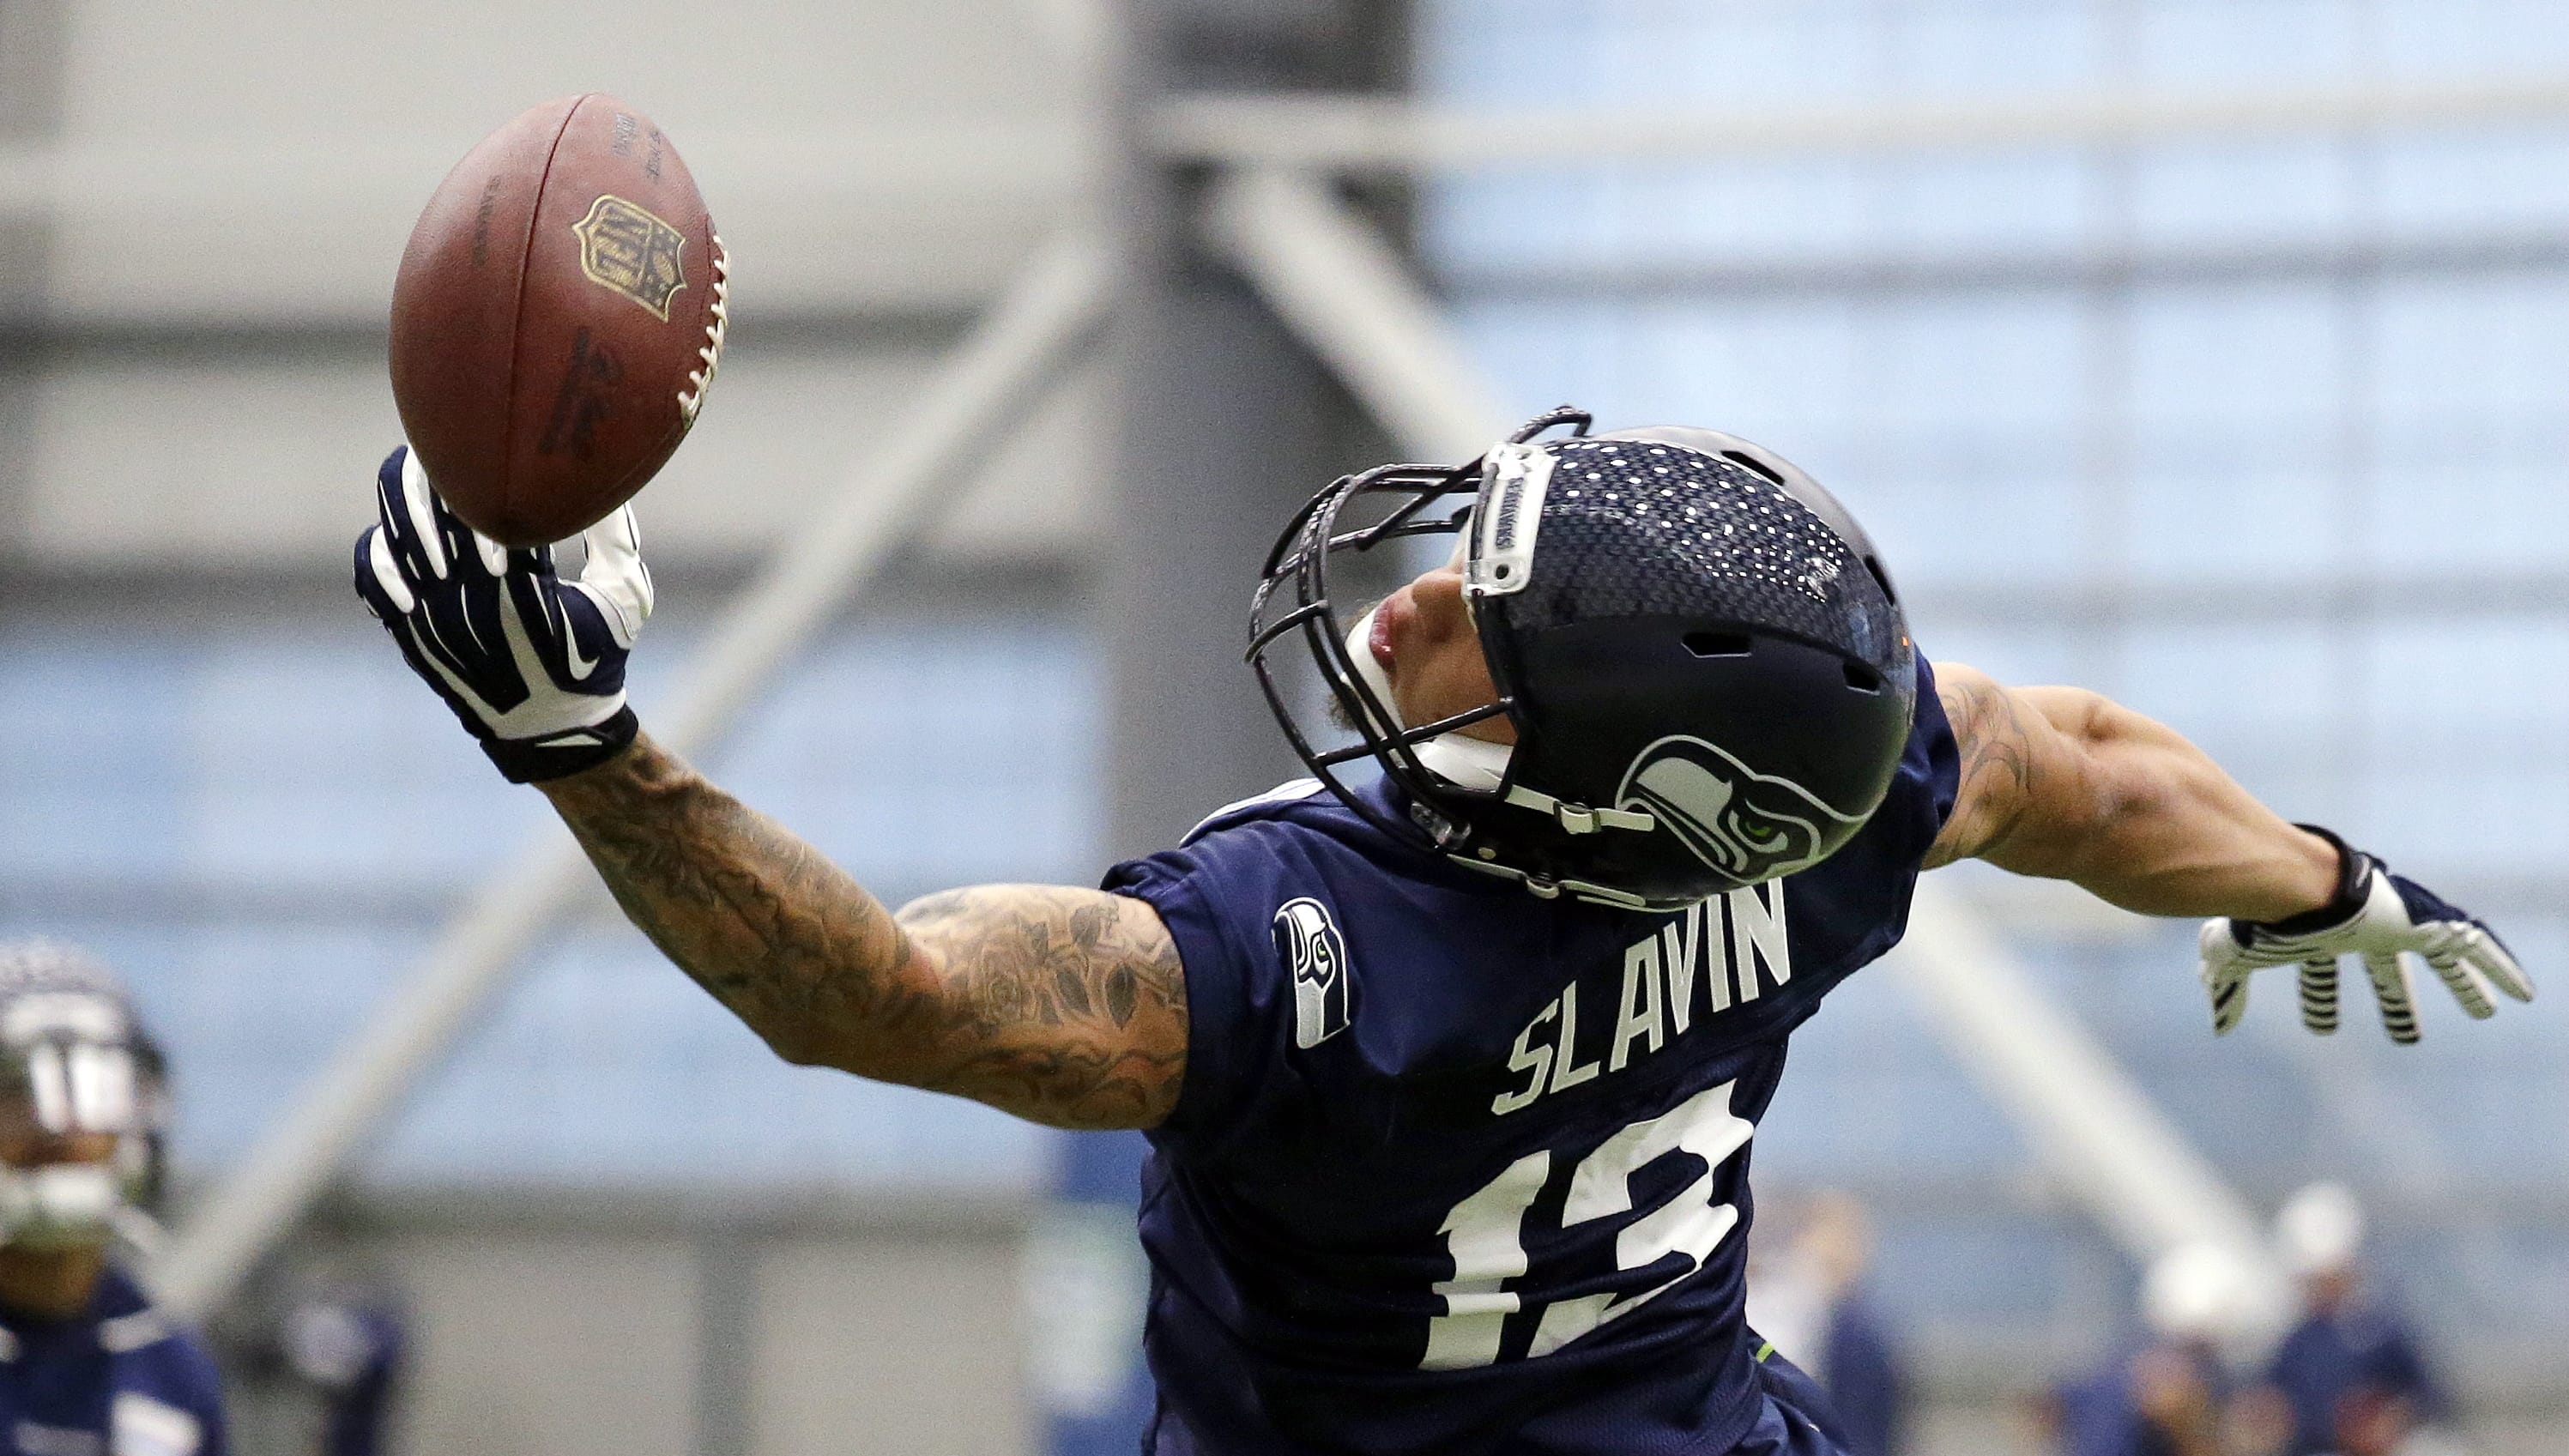 Seattle Seahawks' Tyler Slavin reaches for a pass during an NFL football rookie minicamp workout Sunday, May 8, 2016, in Renton, Wash. He was one of five players signed by the Seahawks on Monday.